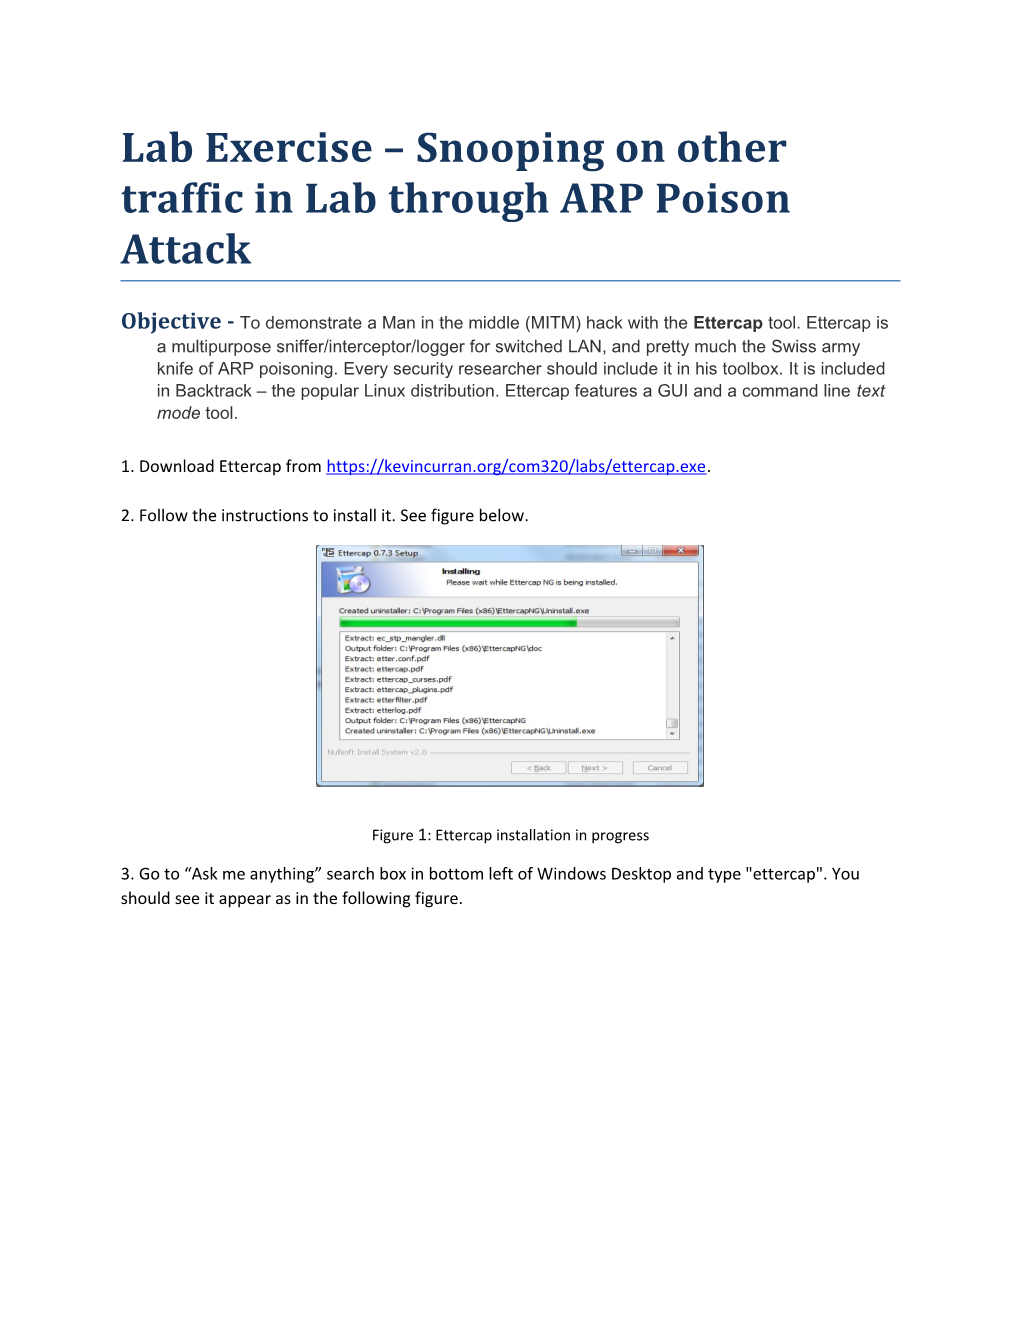 Lab Exercise Snooping on Other Traffic in Lab Through ARP Poison Attack